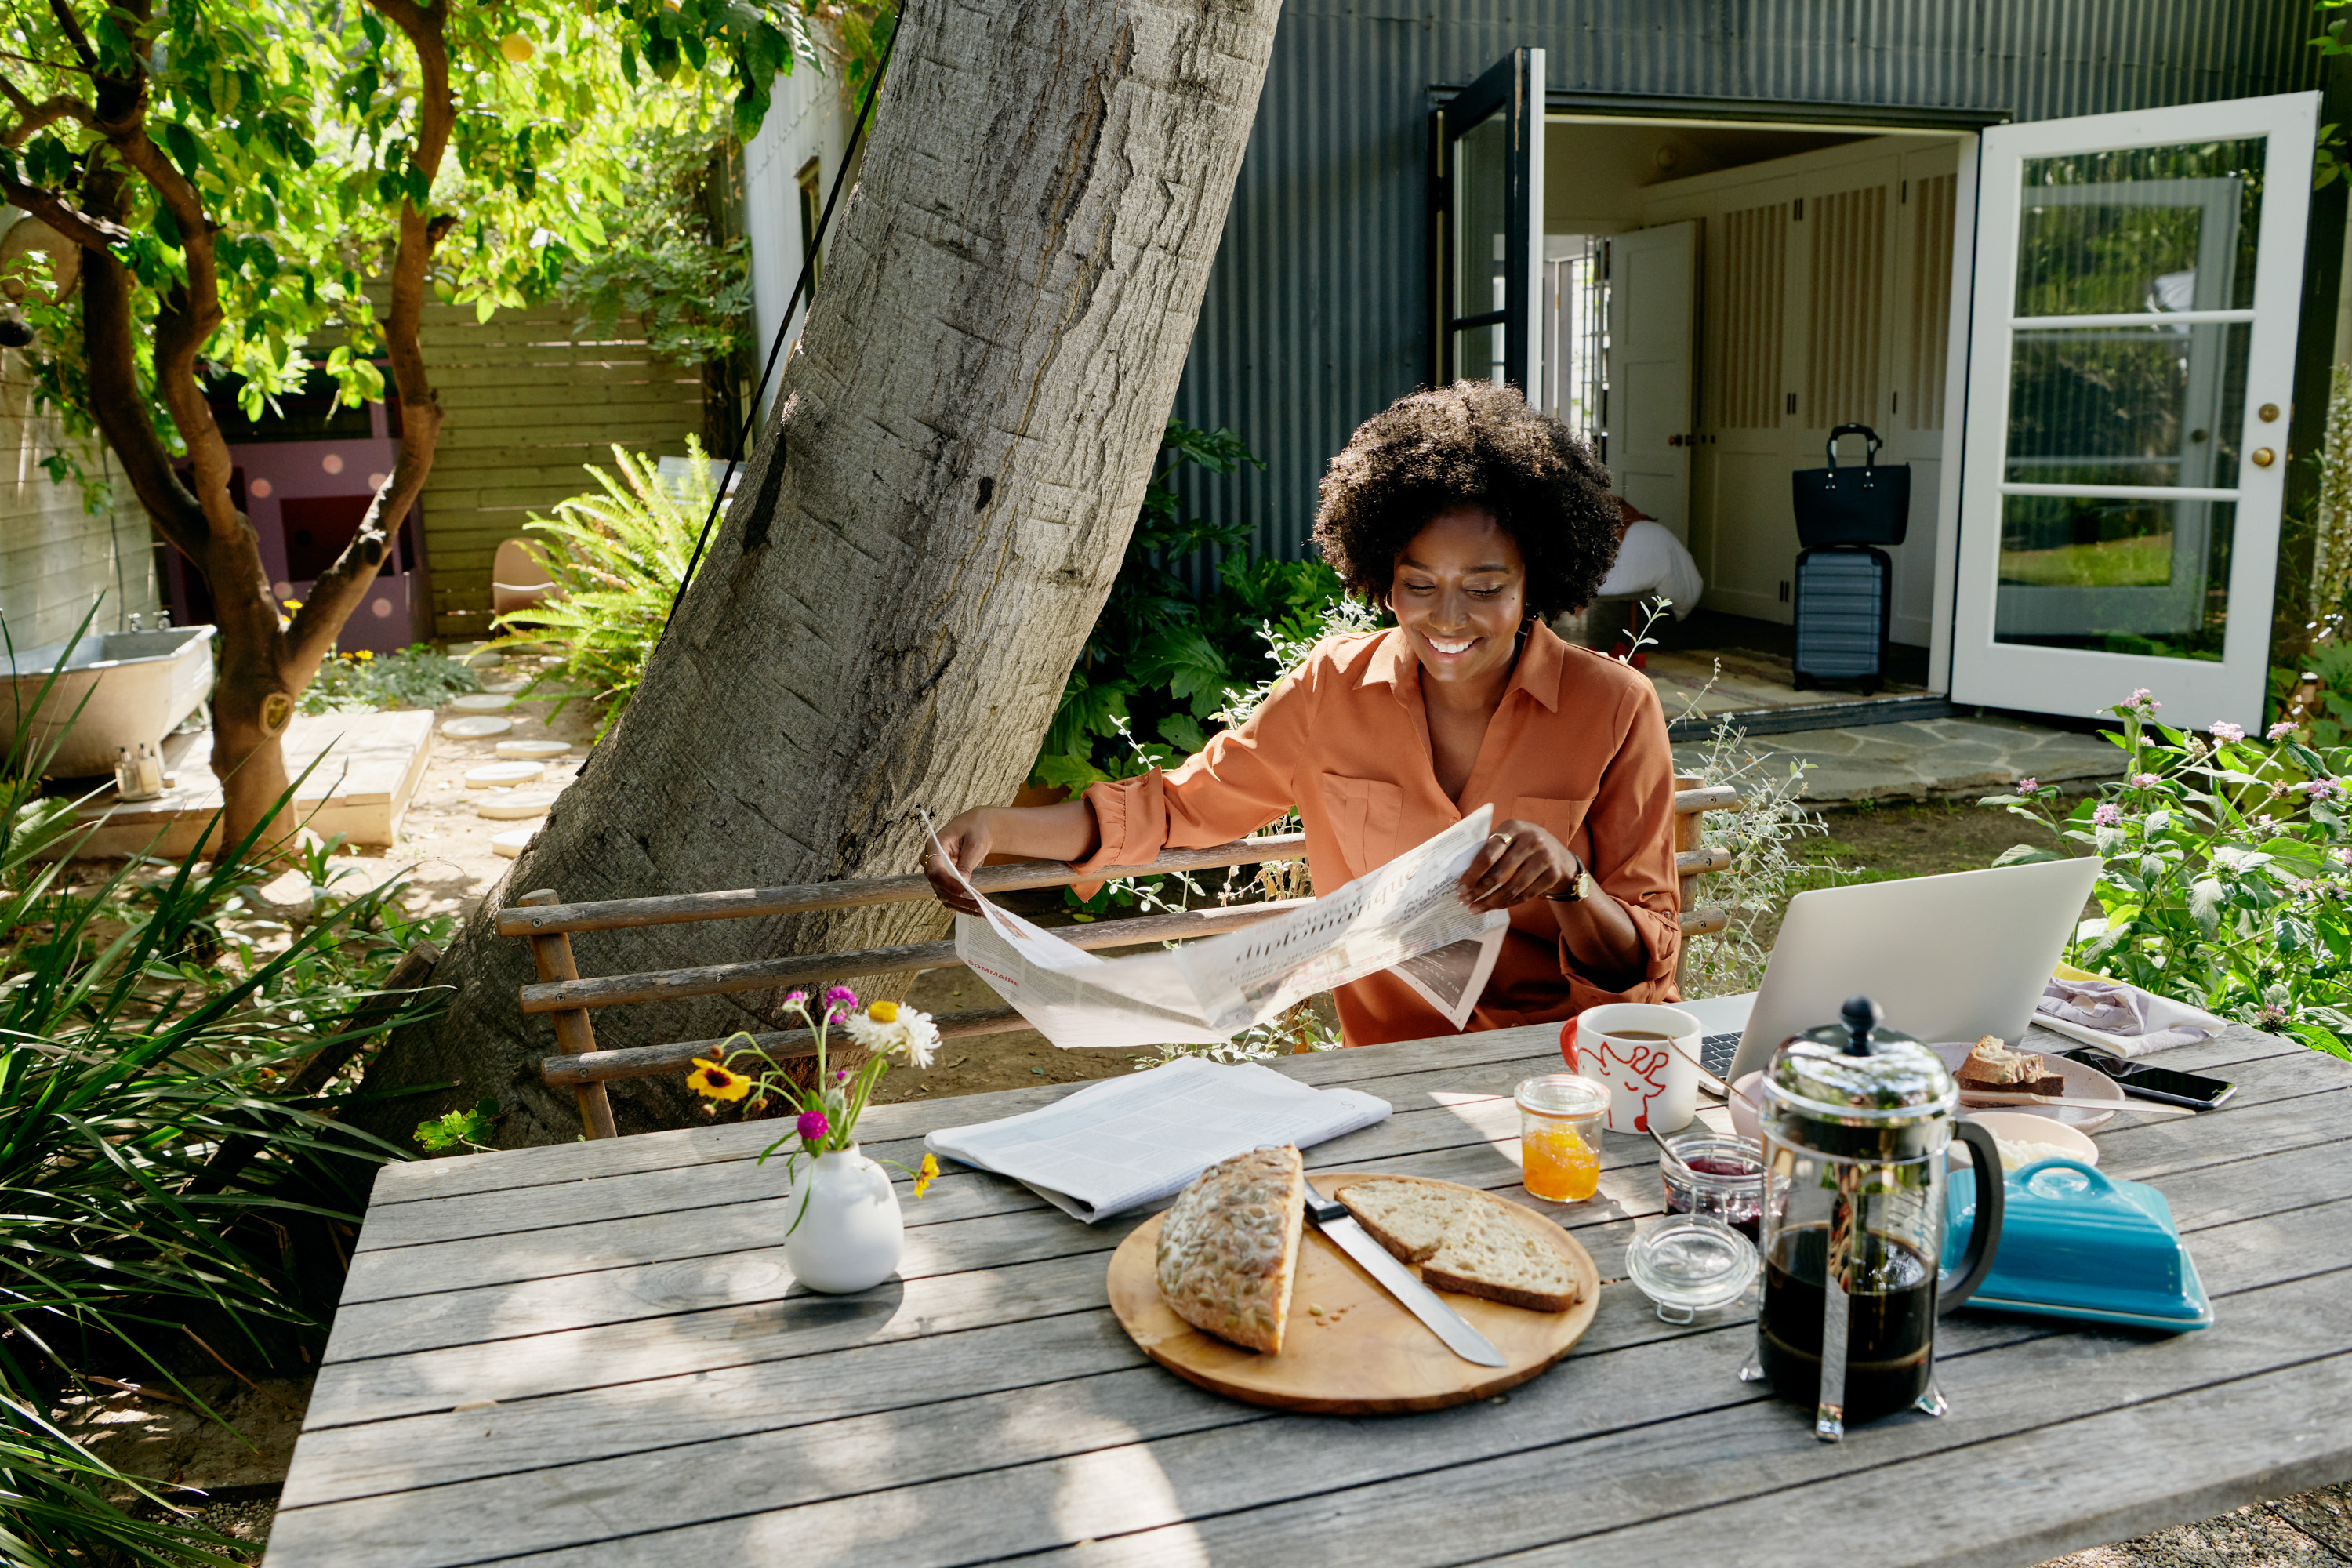 Woman dressed in an orange shirt is seated at a patio table outside her listing reading the newspaper, eating breakfast and working on her laptop.